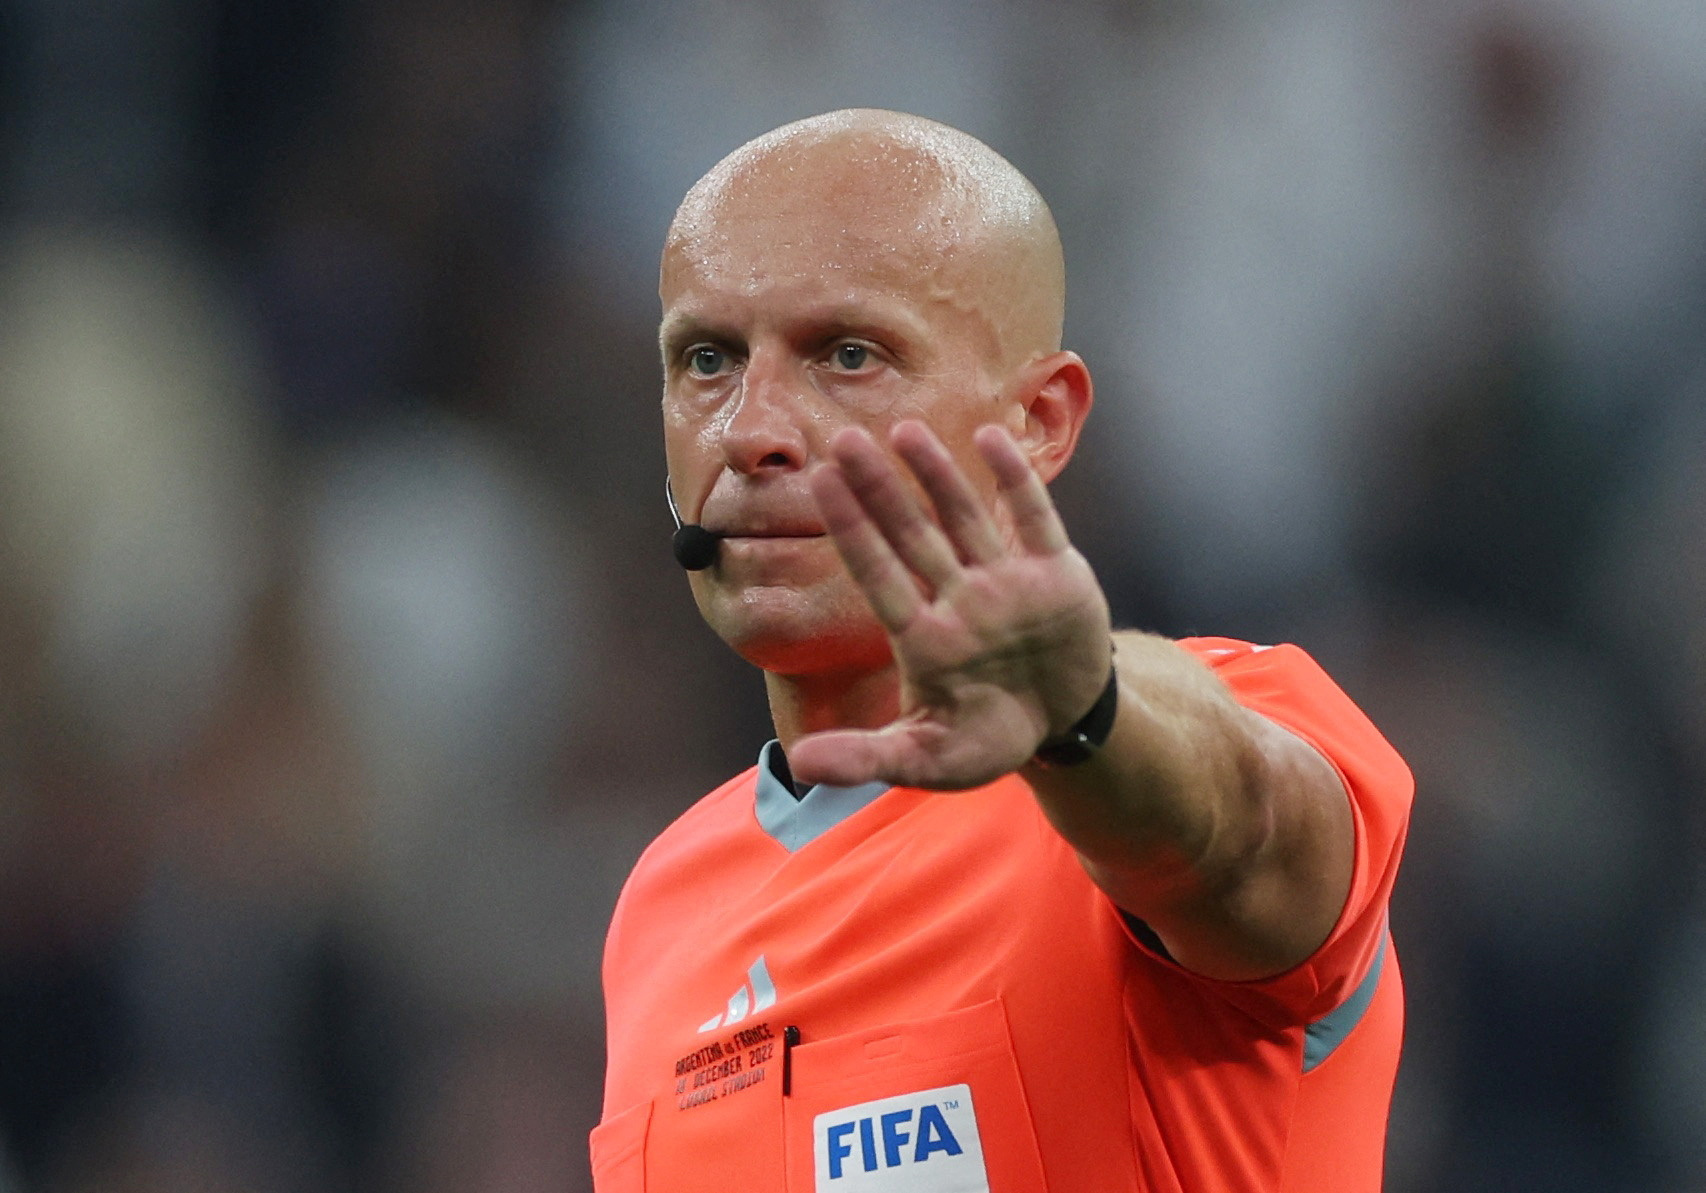 World Cup final referee Marciniak to officiate Champions League final